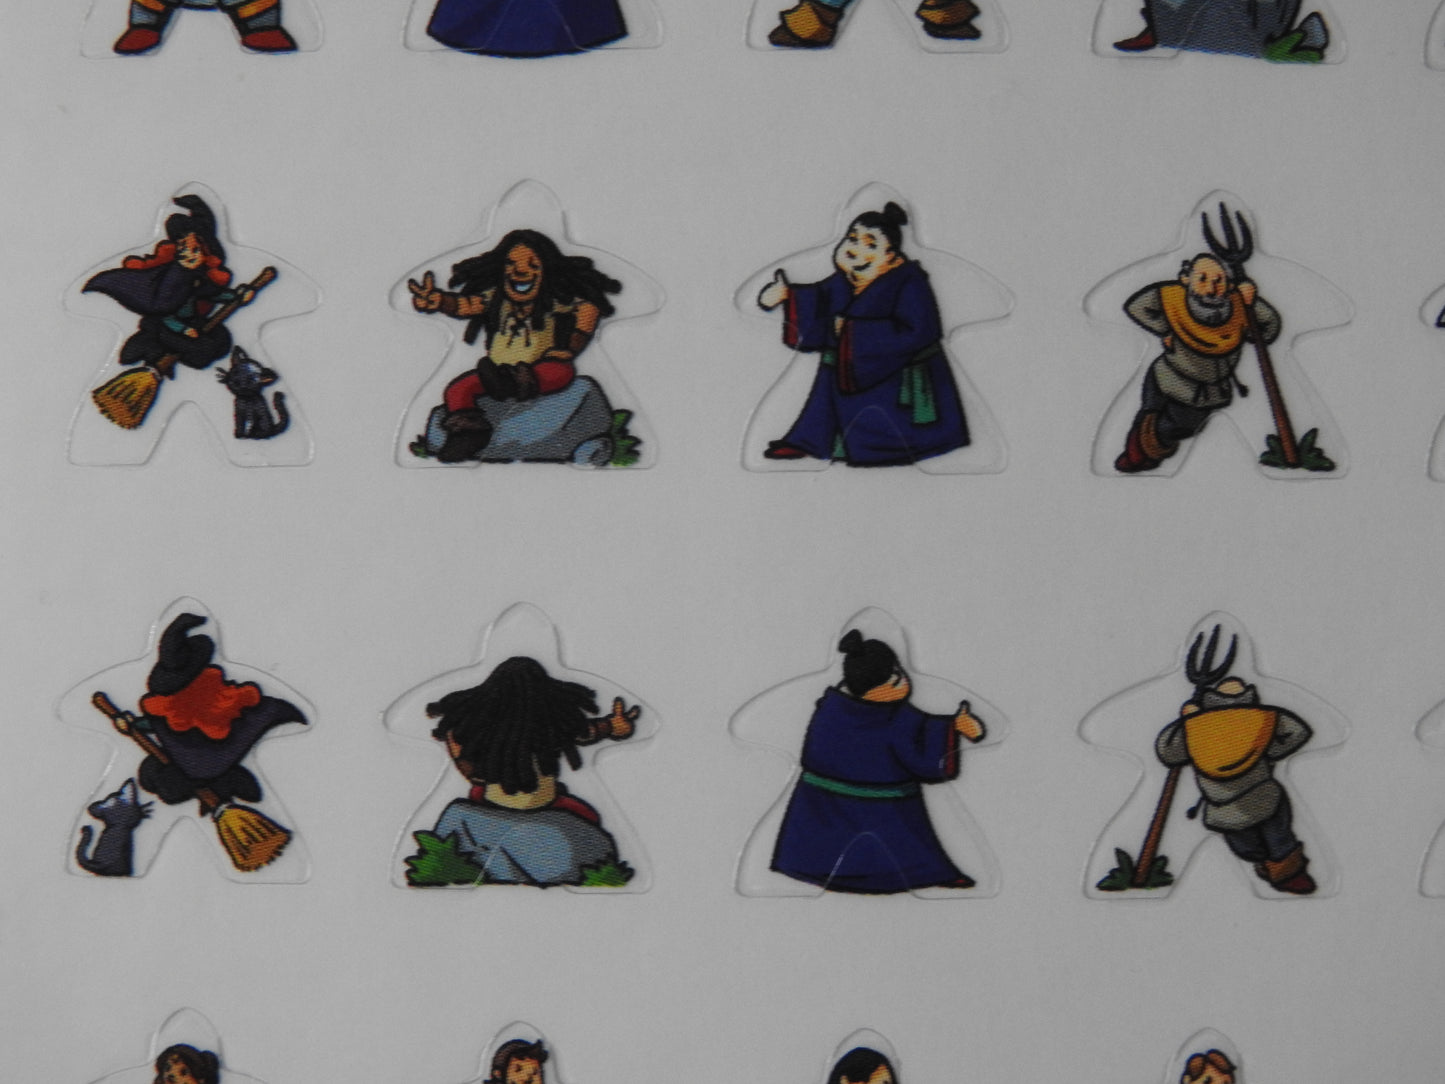 Close-up view of some of the meeple stickers, including a witch on a broomstick and a man sitting happily on a rock.